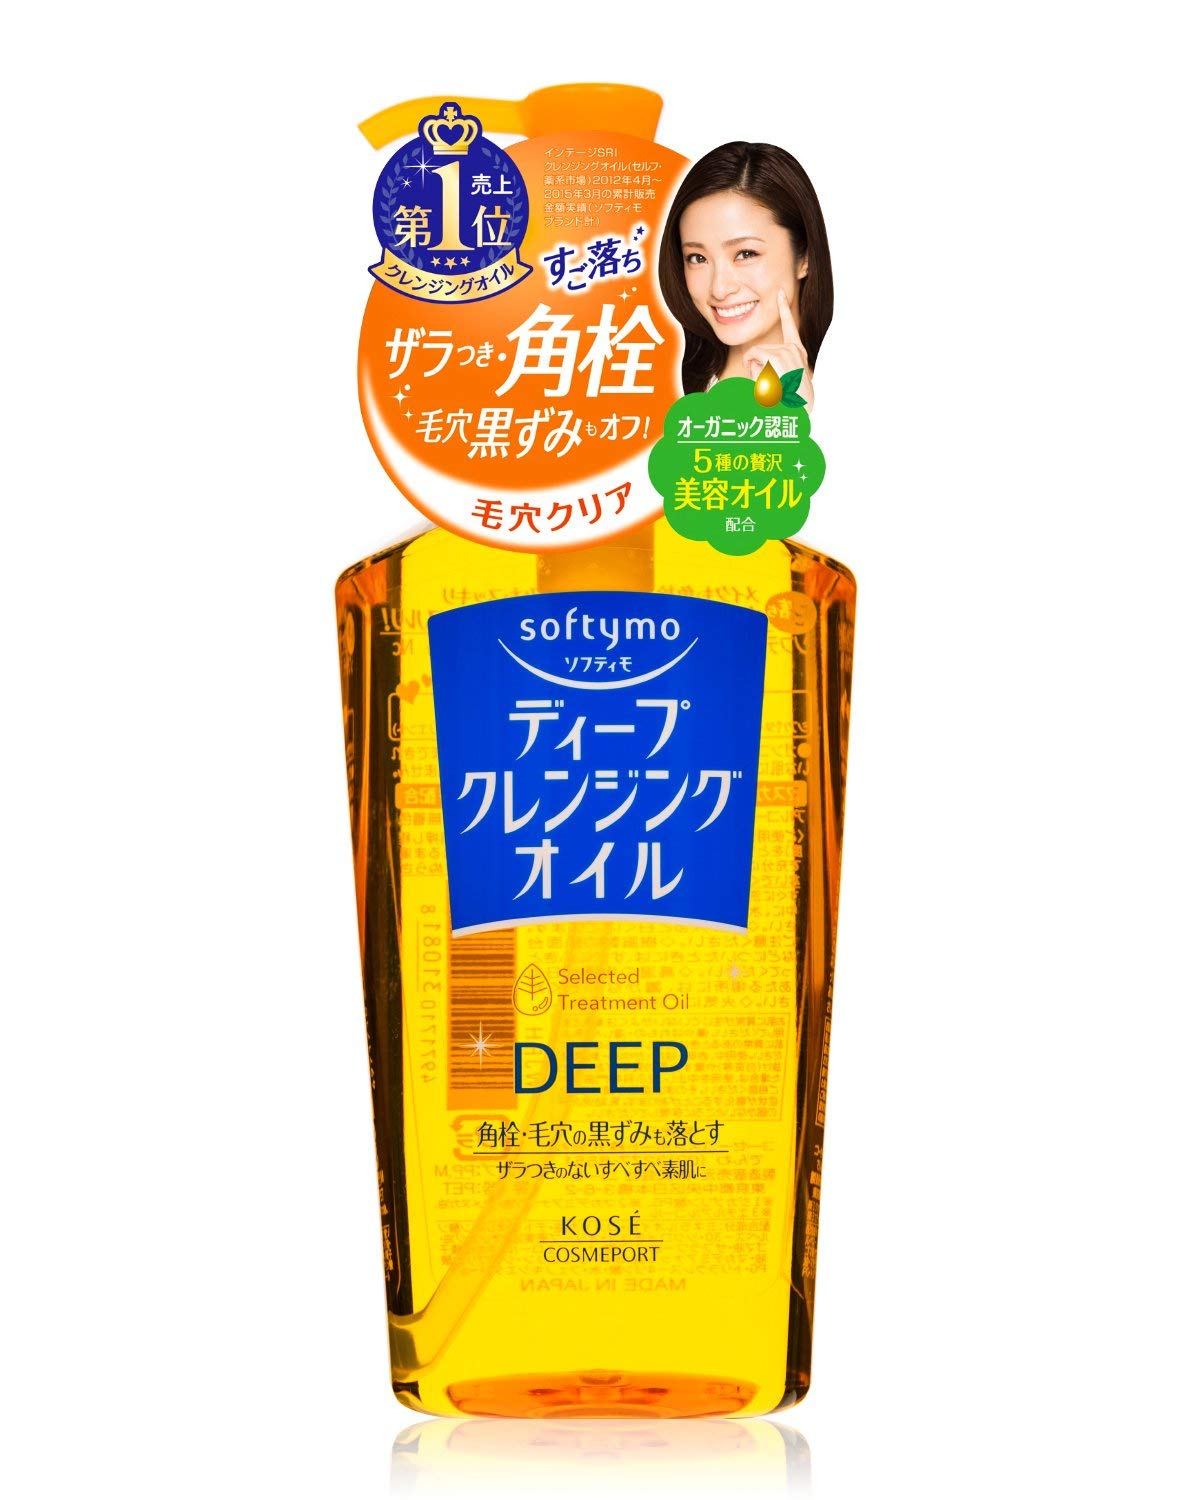 Softymo Deeply Cleansing Oil 230mL